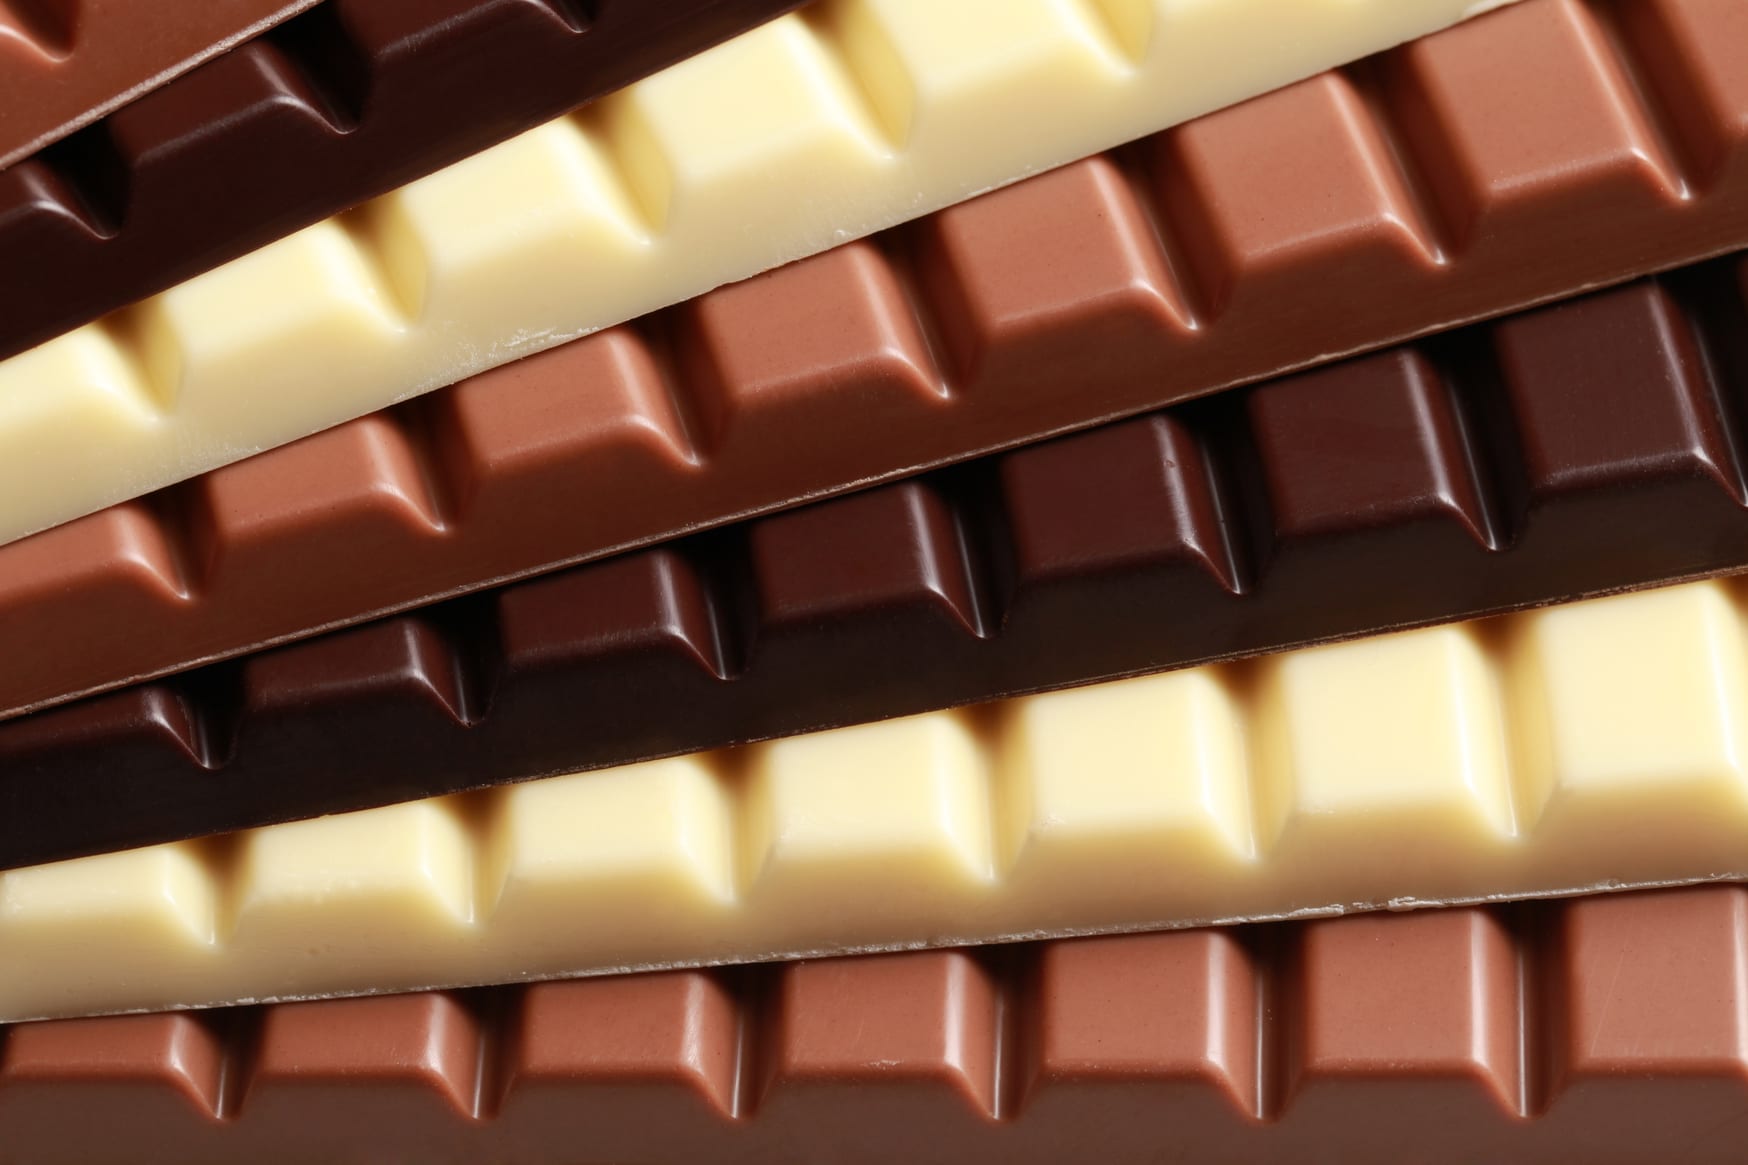 Chocolate: Should It Be Kept in the Refrigerator?